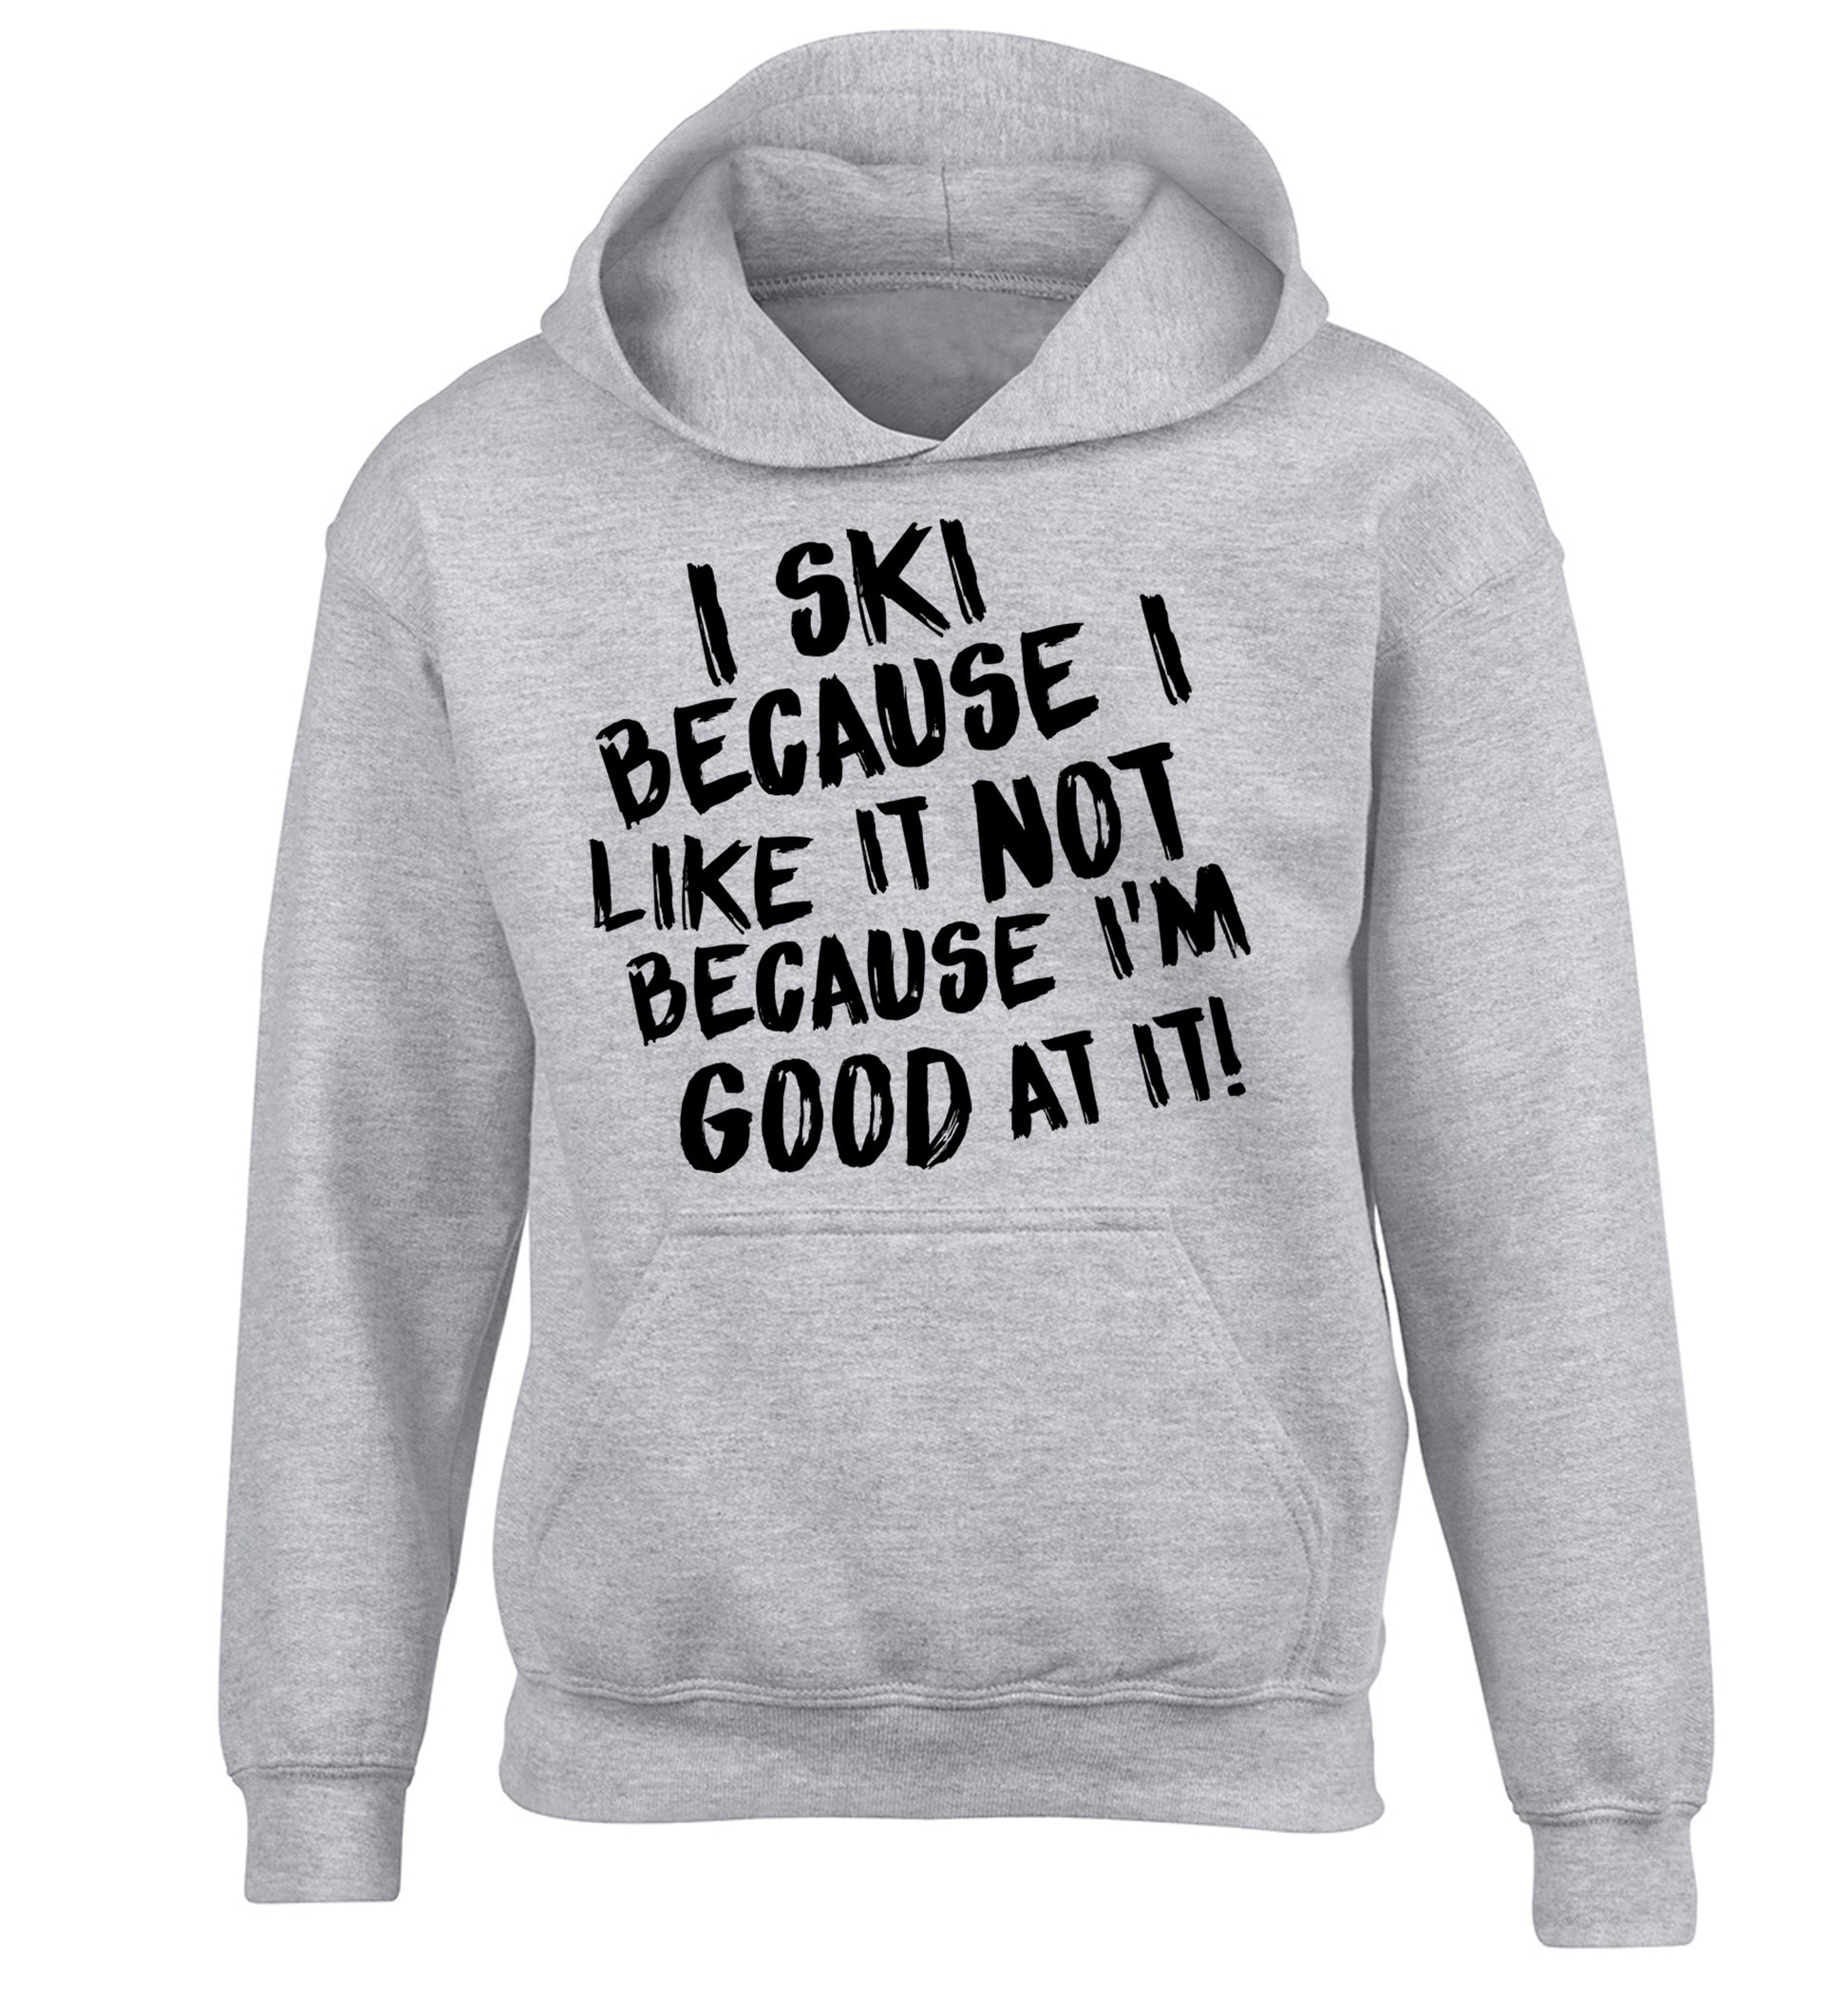 I ski because I like it not because I'm good at it children's grey hoodie 12-14 Years